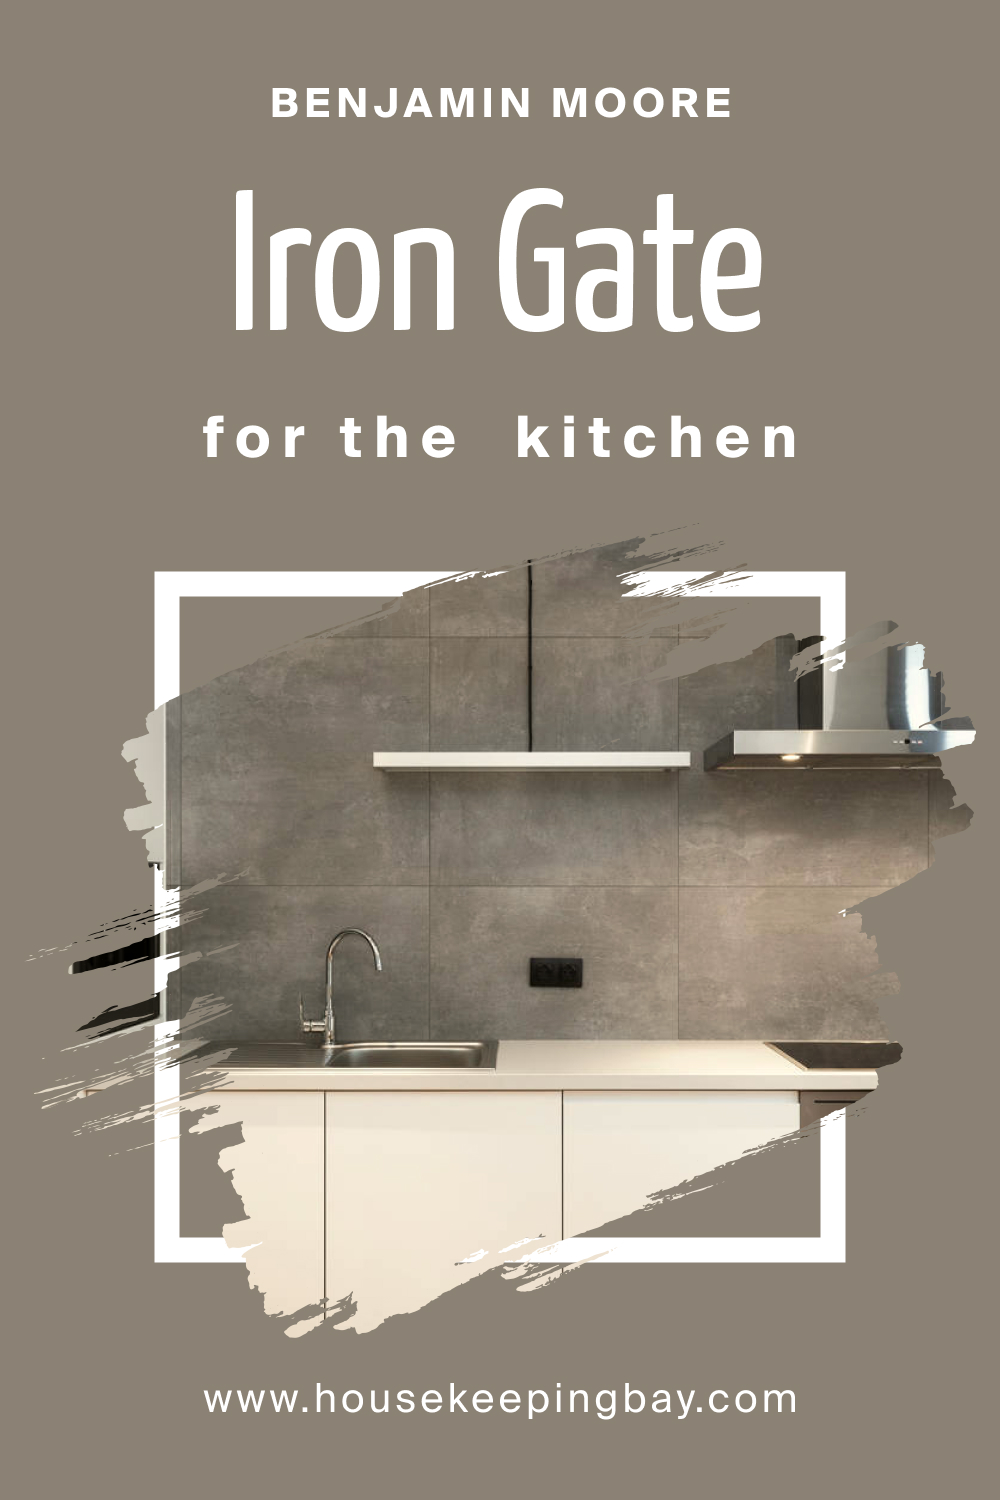 How to Use BM Iron Gate 1545 in the Kitchen?